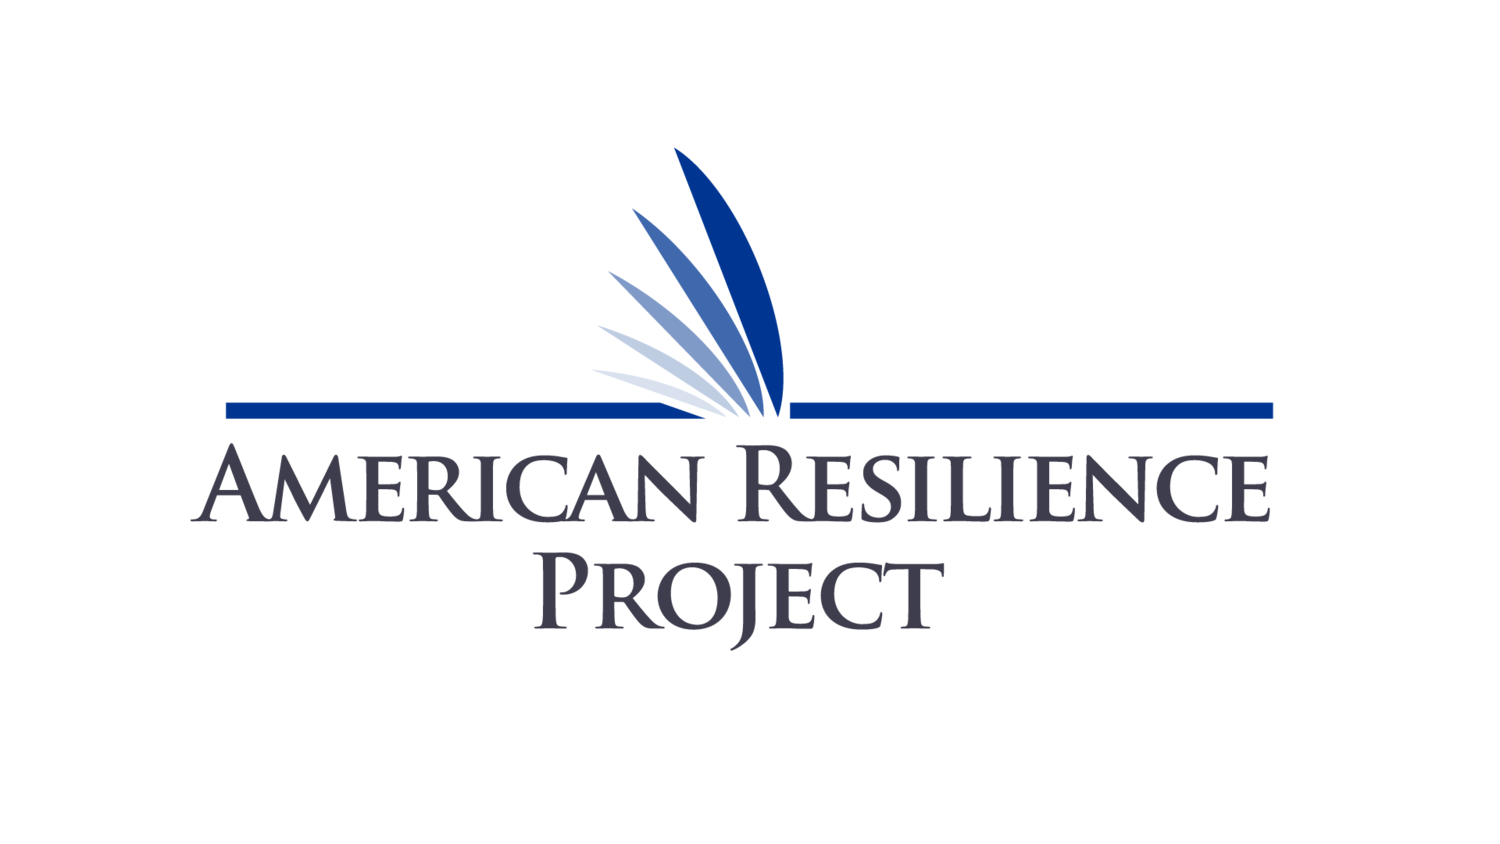 American Resilience Project